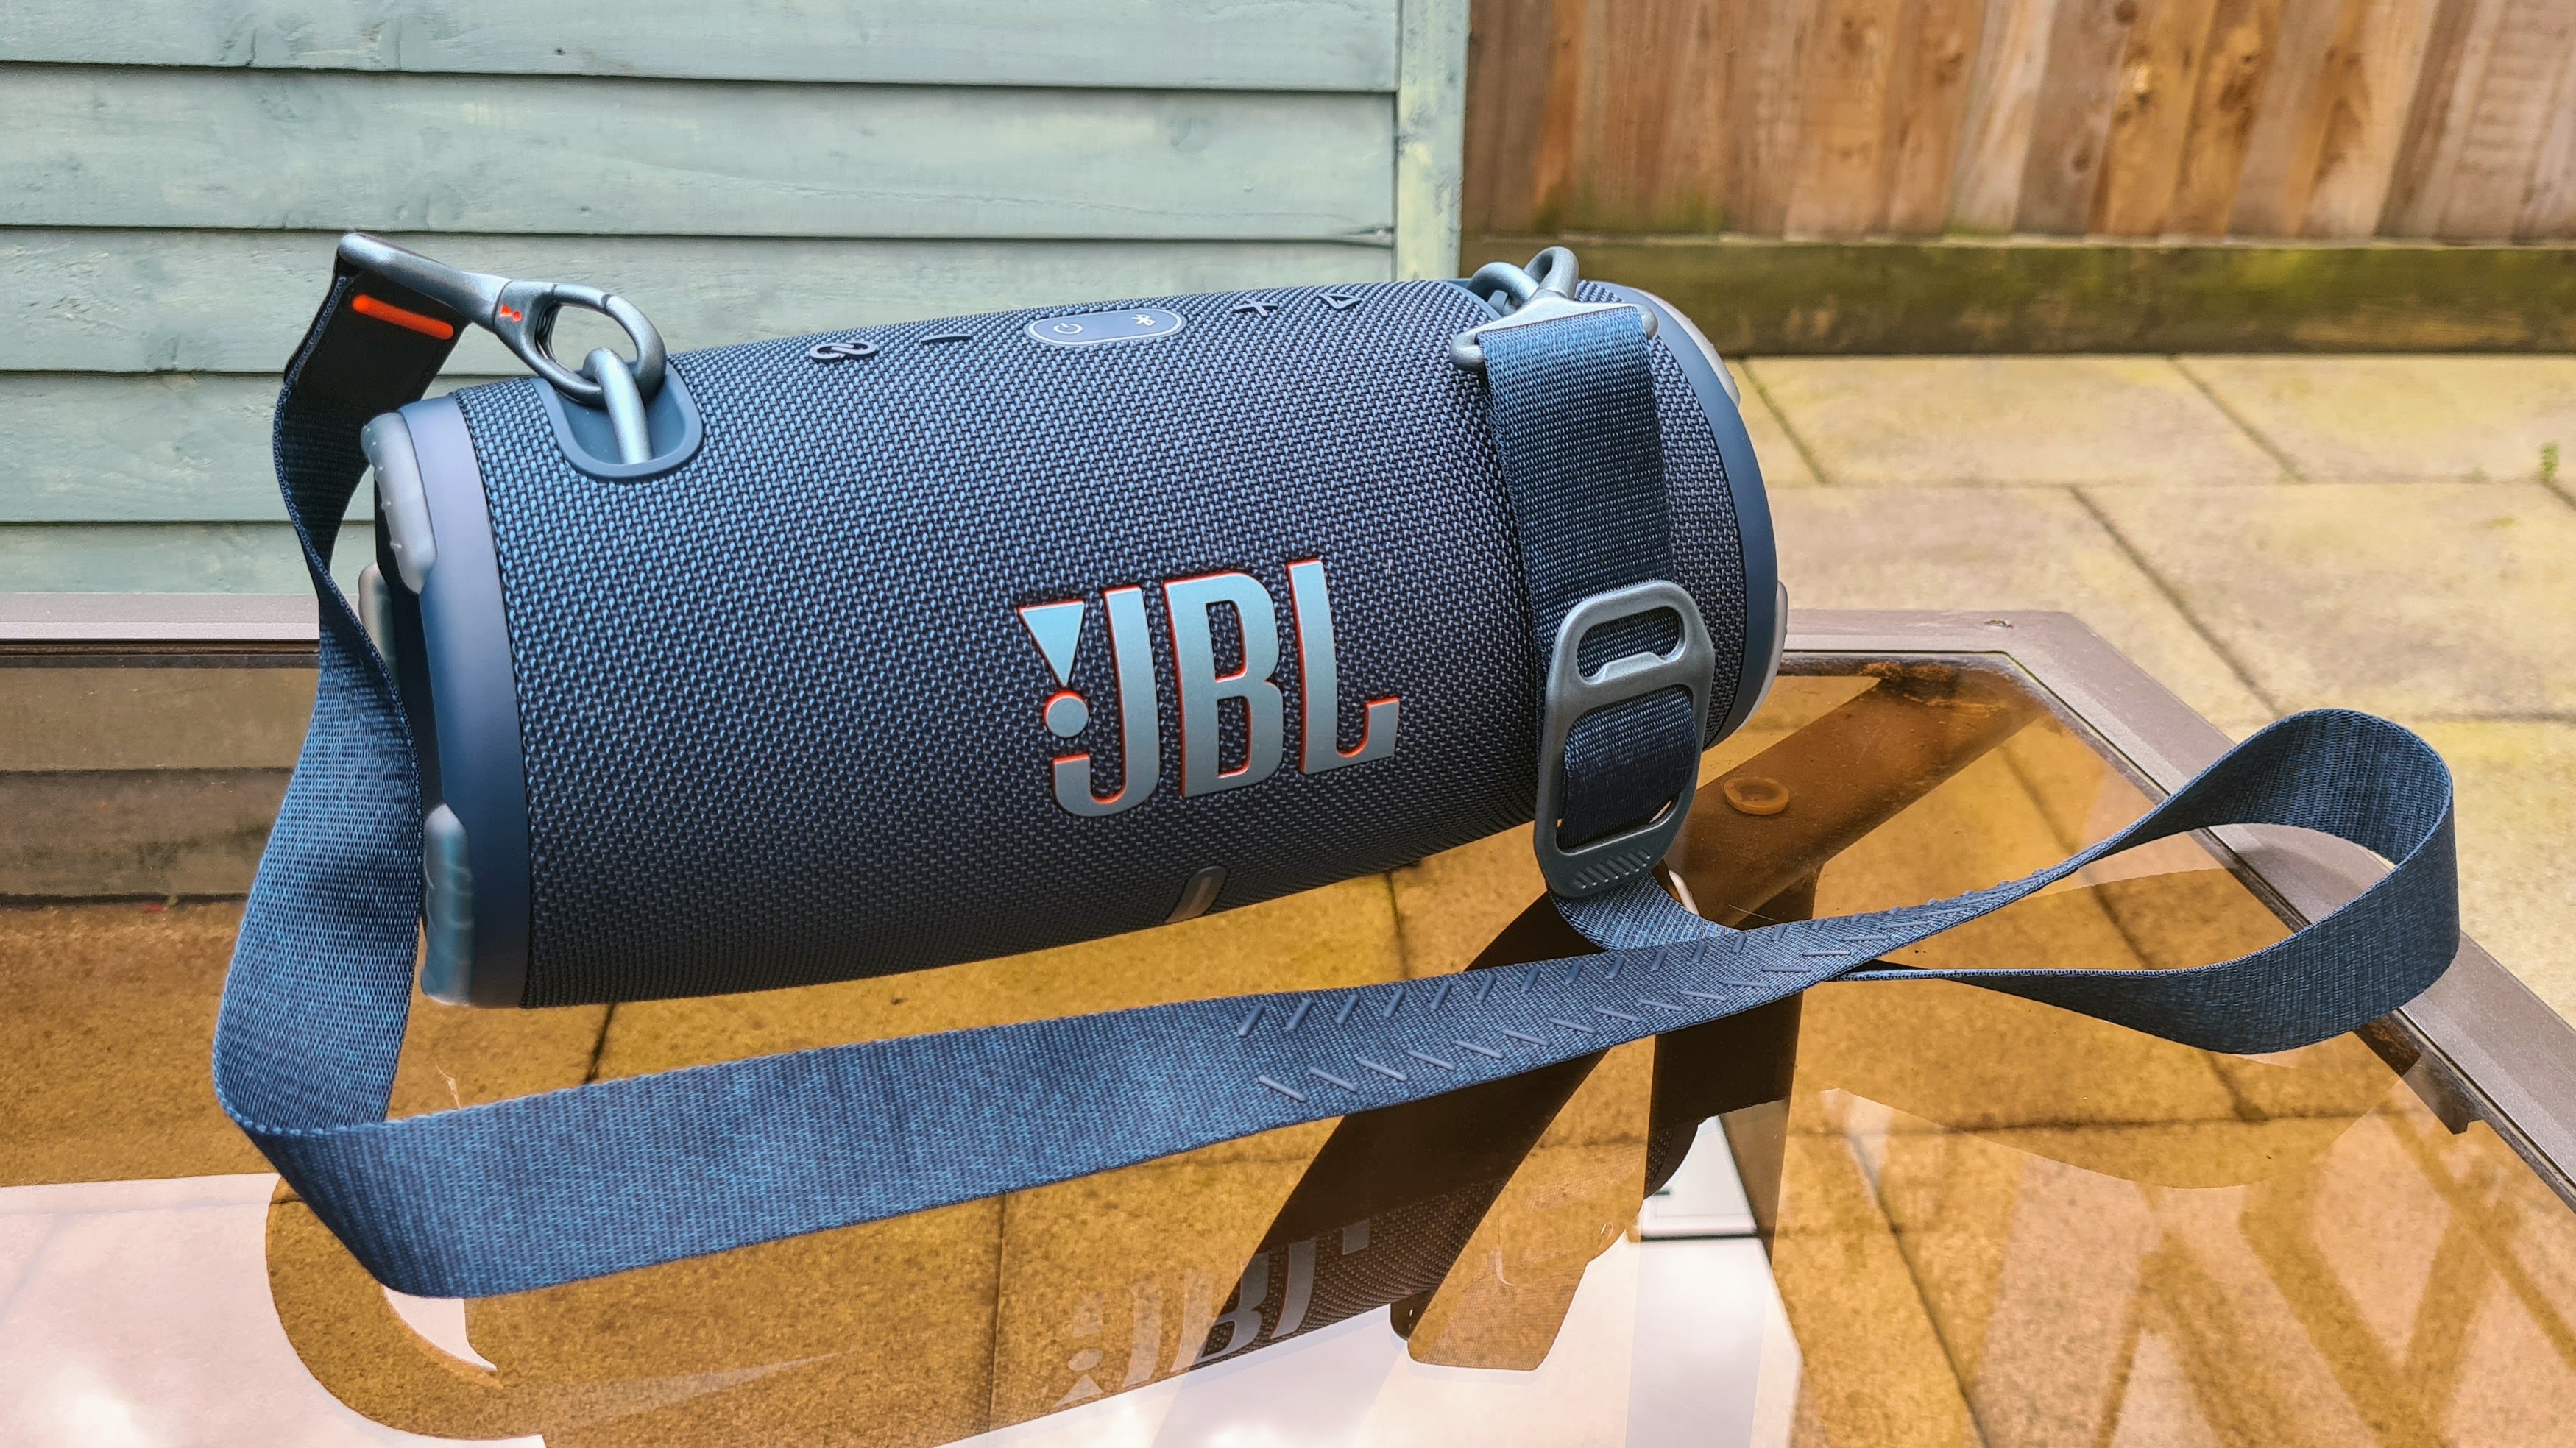 JBL 3 rugged durable with big sound | T3